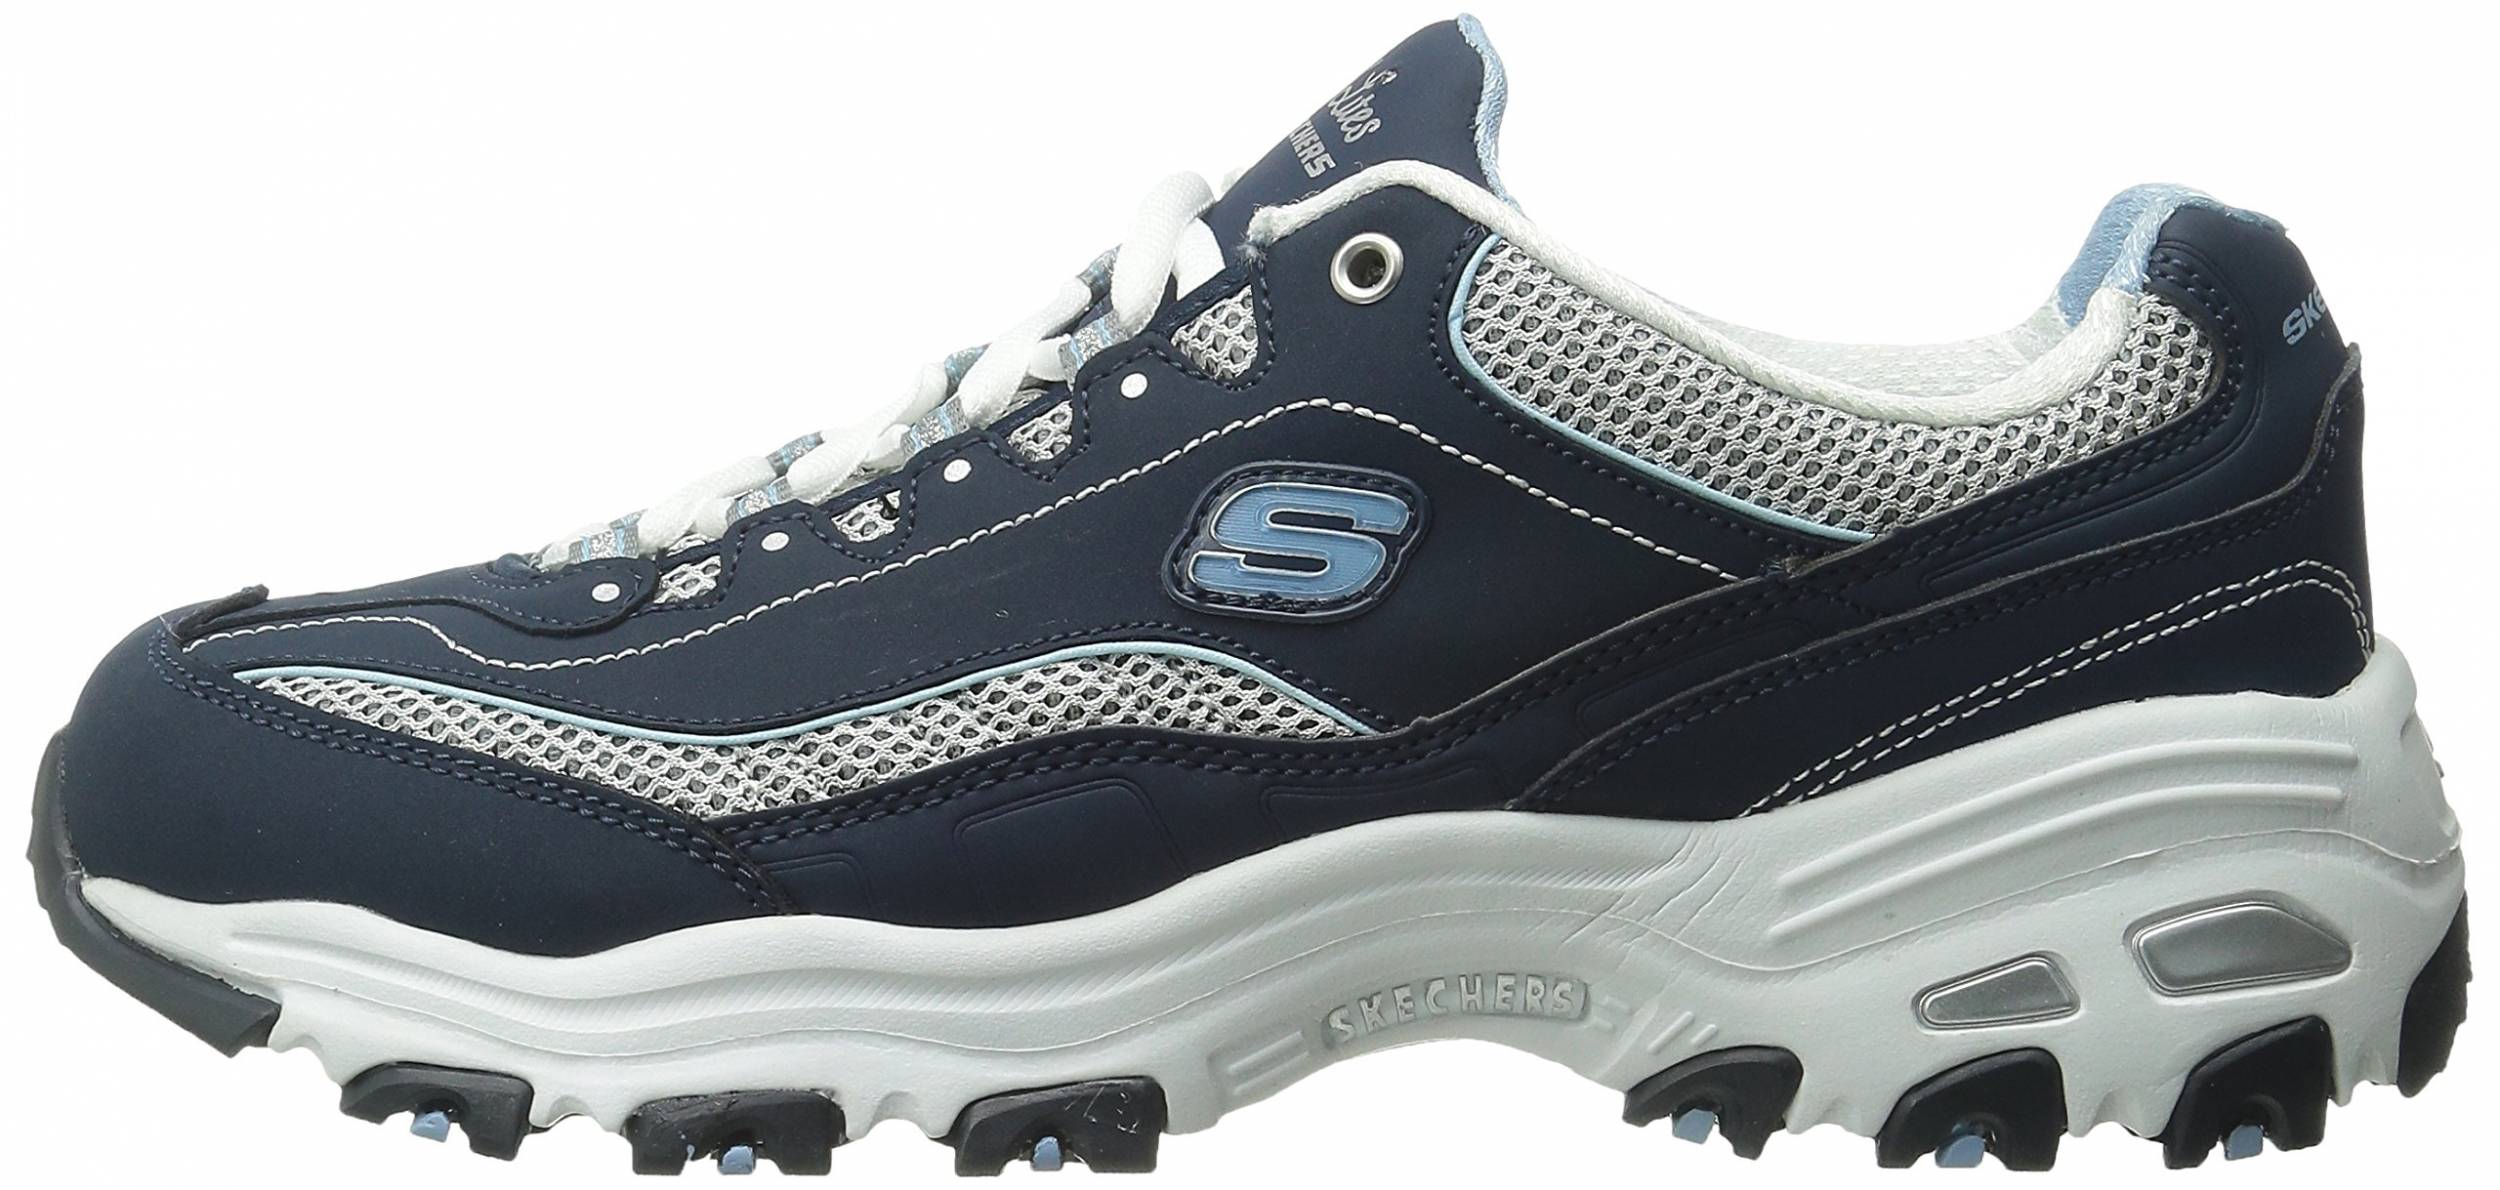 Positive Parcel incident Skechers D'Lites - Life Saver sneakers in 3 colors (only $52) | RunRepeat